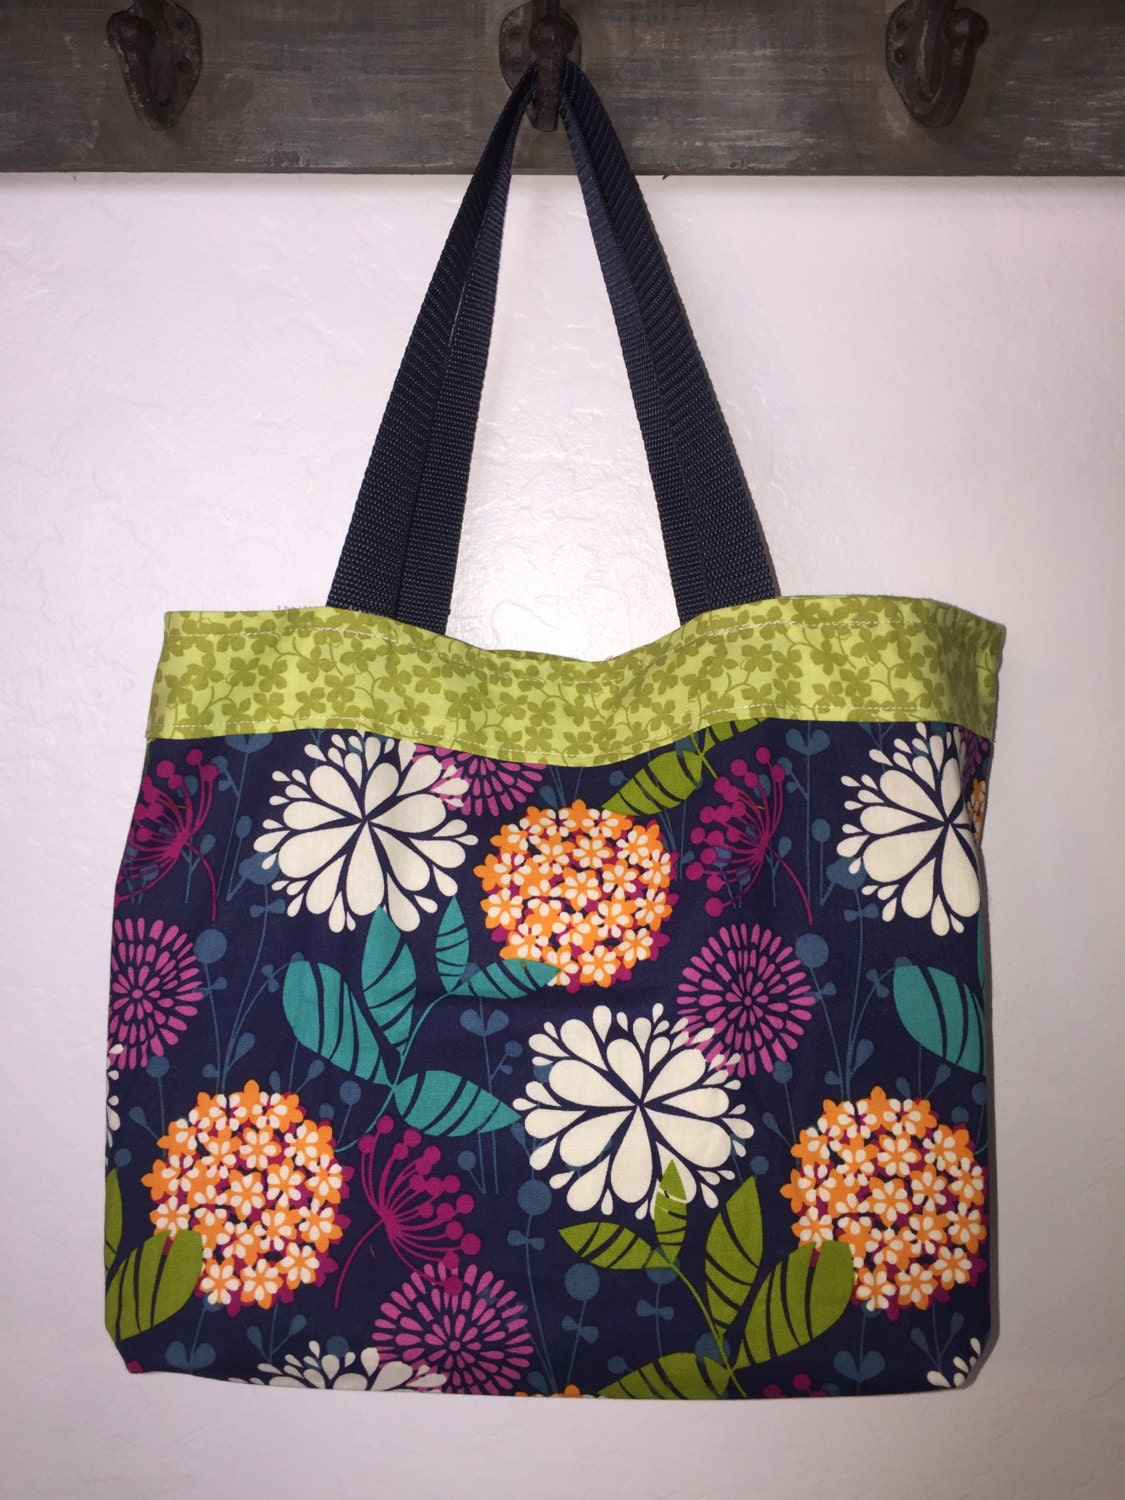 ON SALE Large washable reusable shopping tote grocery bag